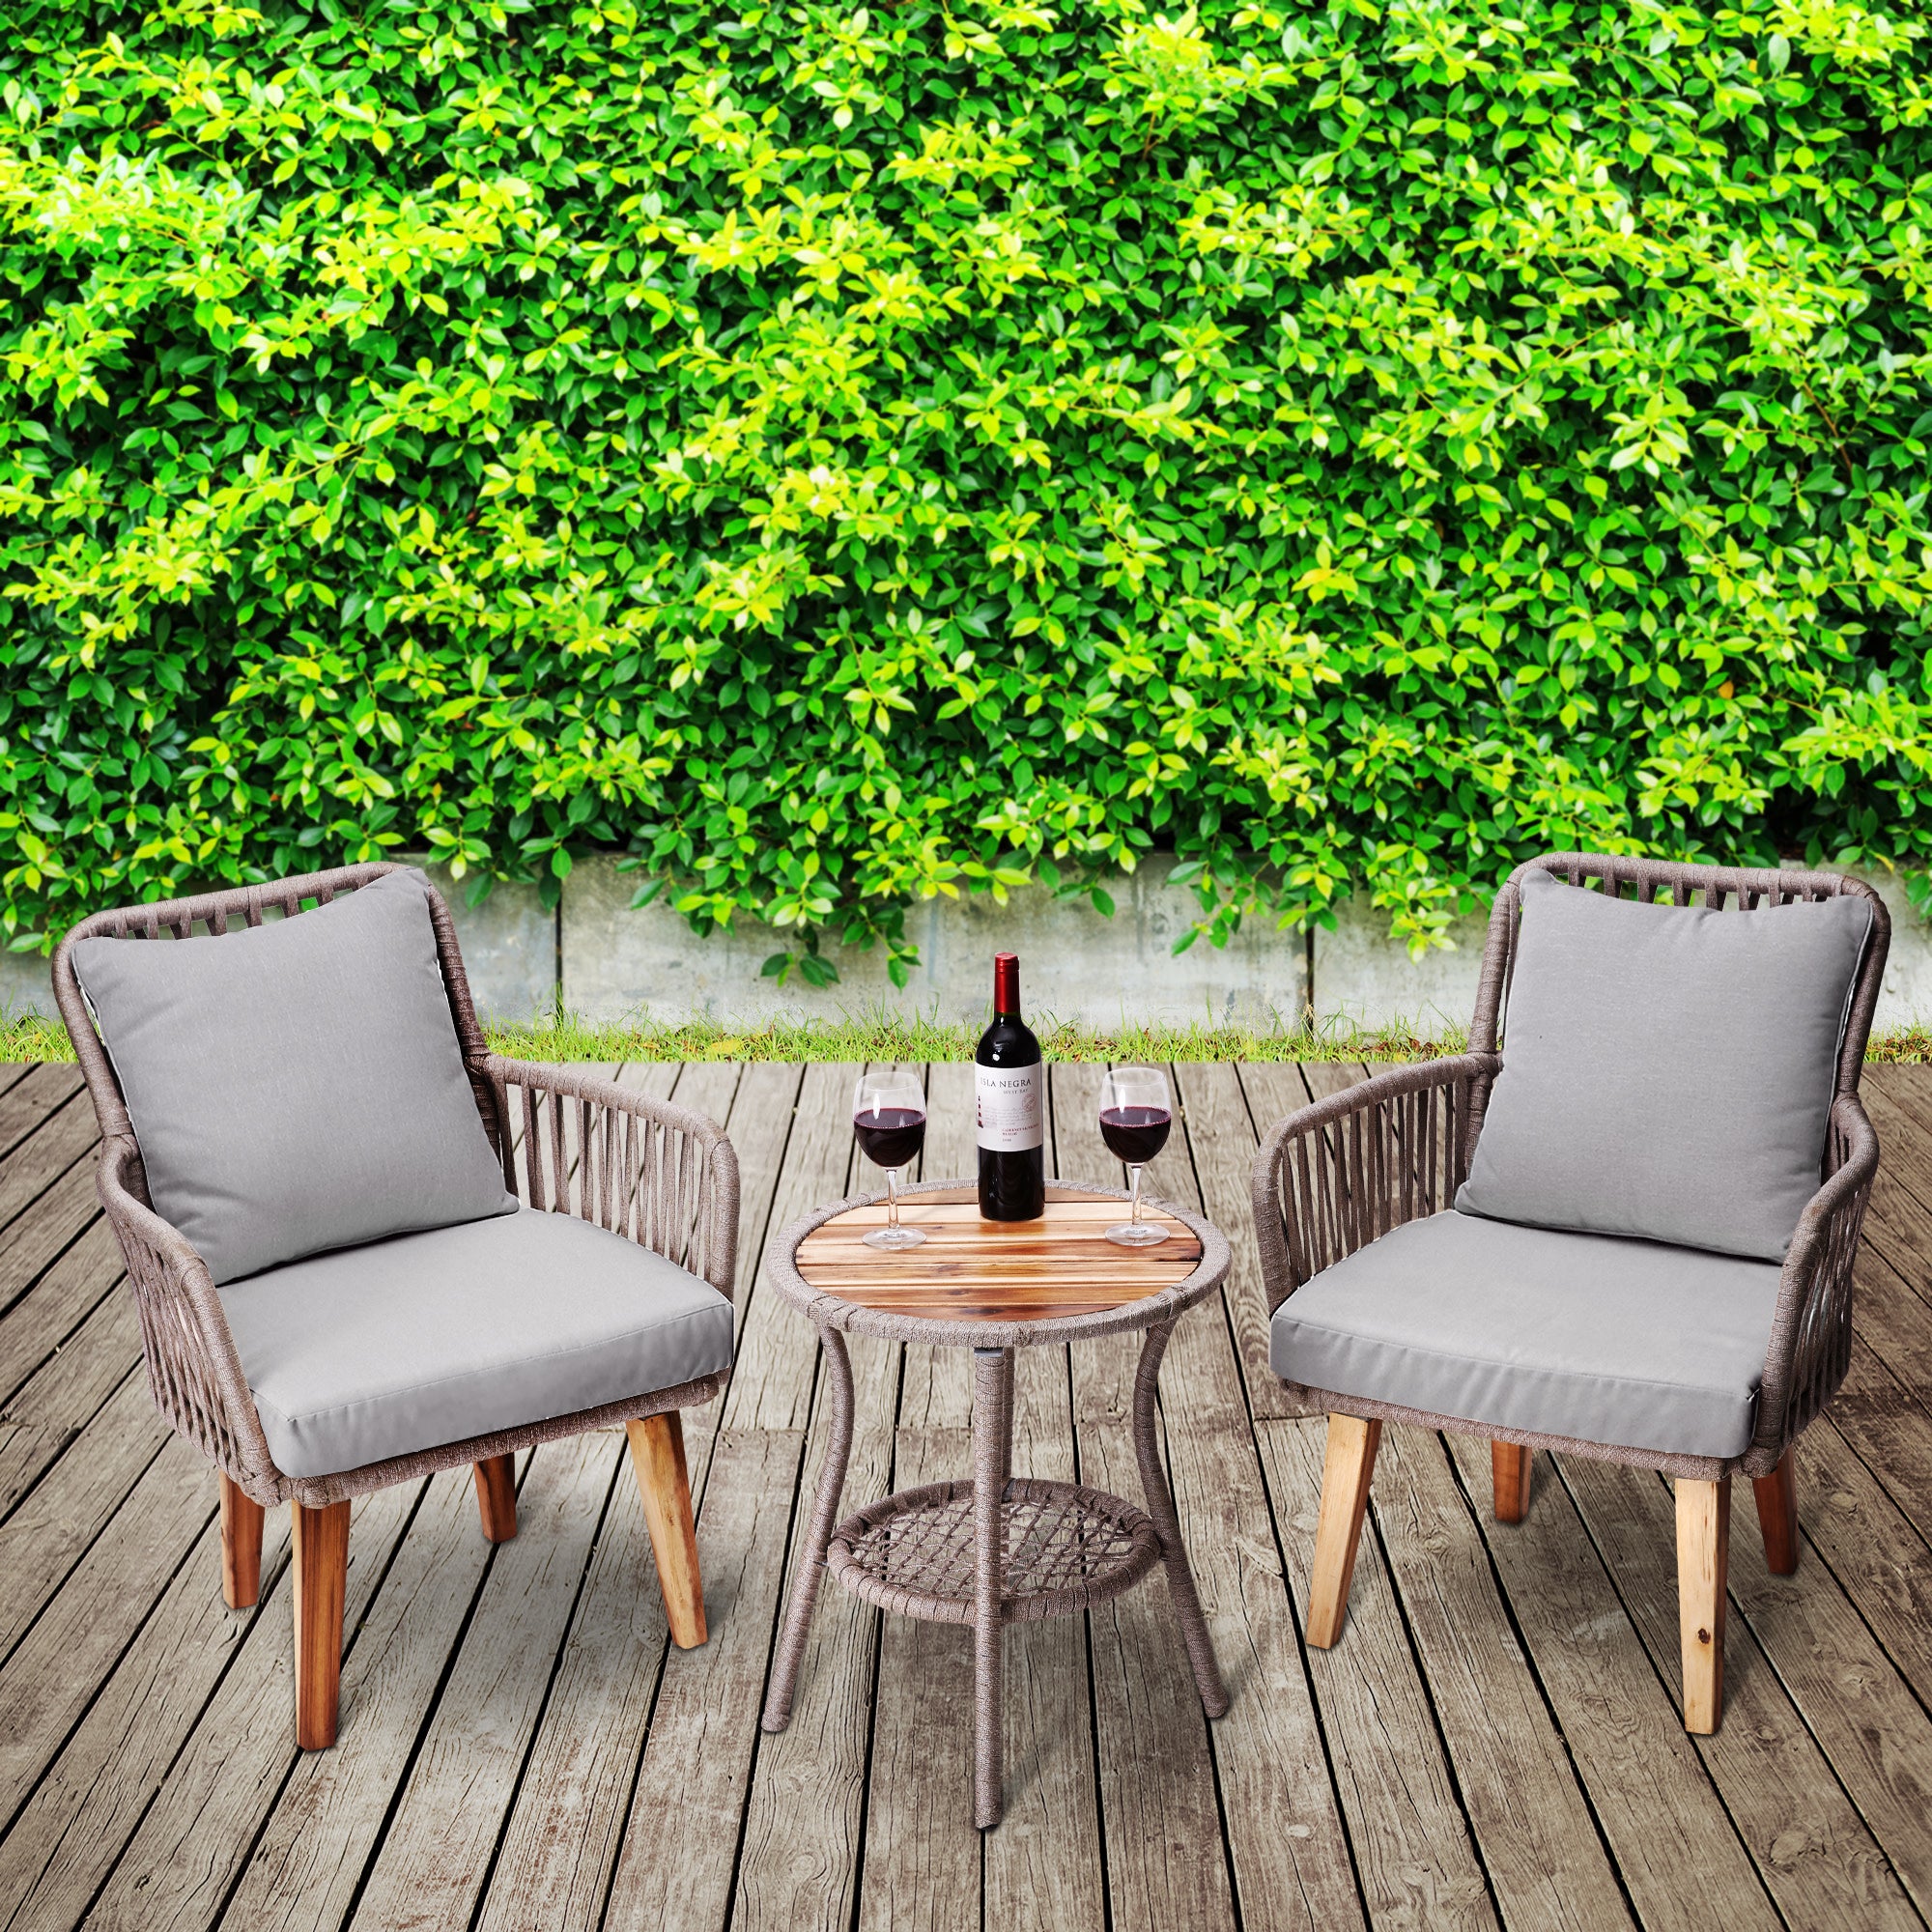 Teamson Home Indoor/Outdoor 3 Piece Wicker Bistro Patio Set with Table, Chairs and Cushions Set